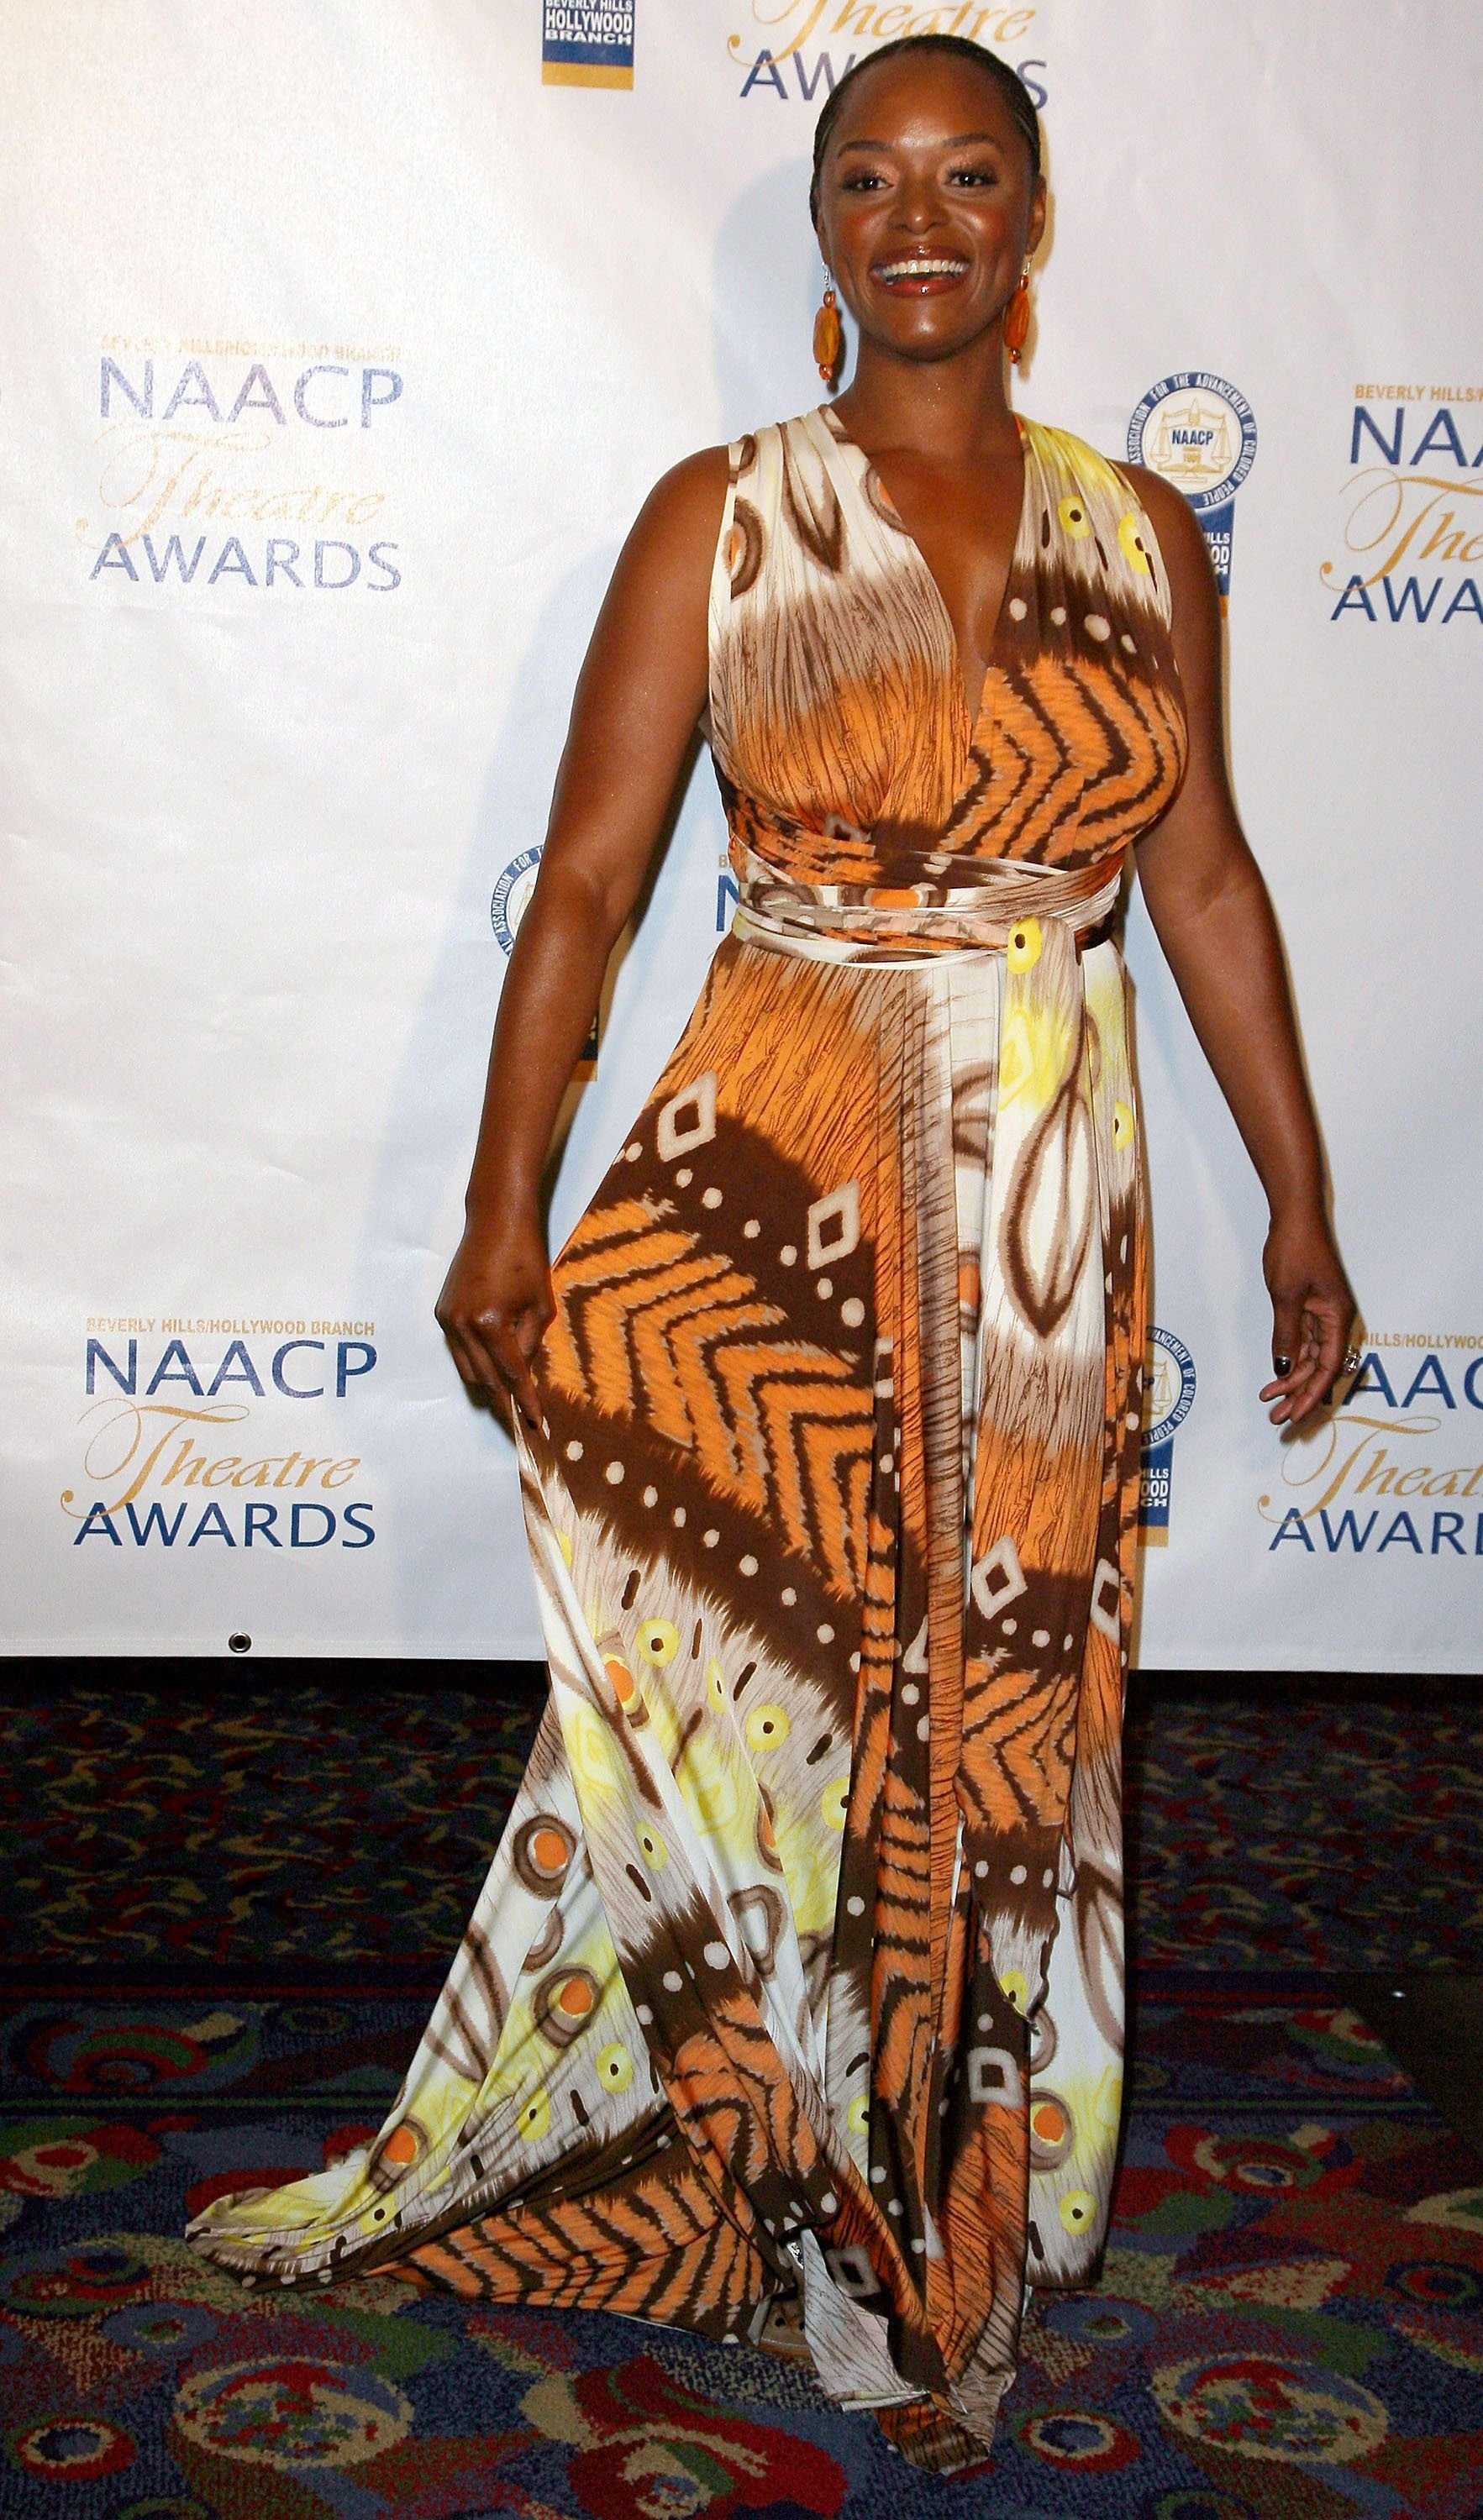 Actress N'Bushe Wright attends the 18th Annual NAACP Theatre Awards at the Renaissance Hotel on June 30, 2008 in Los Angeles, California. | Source: Getty Images